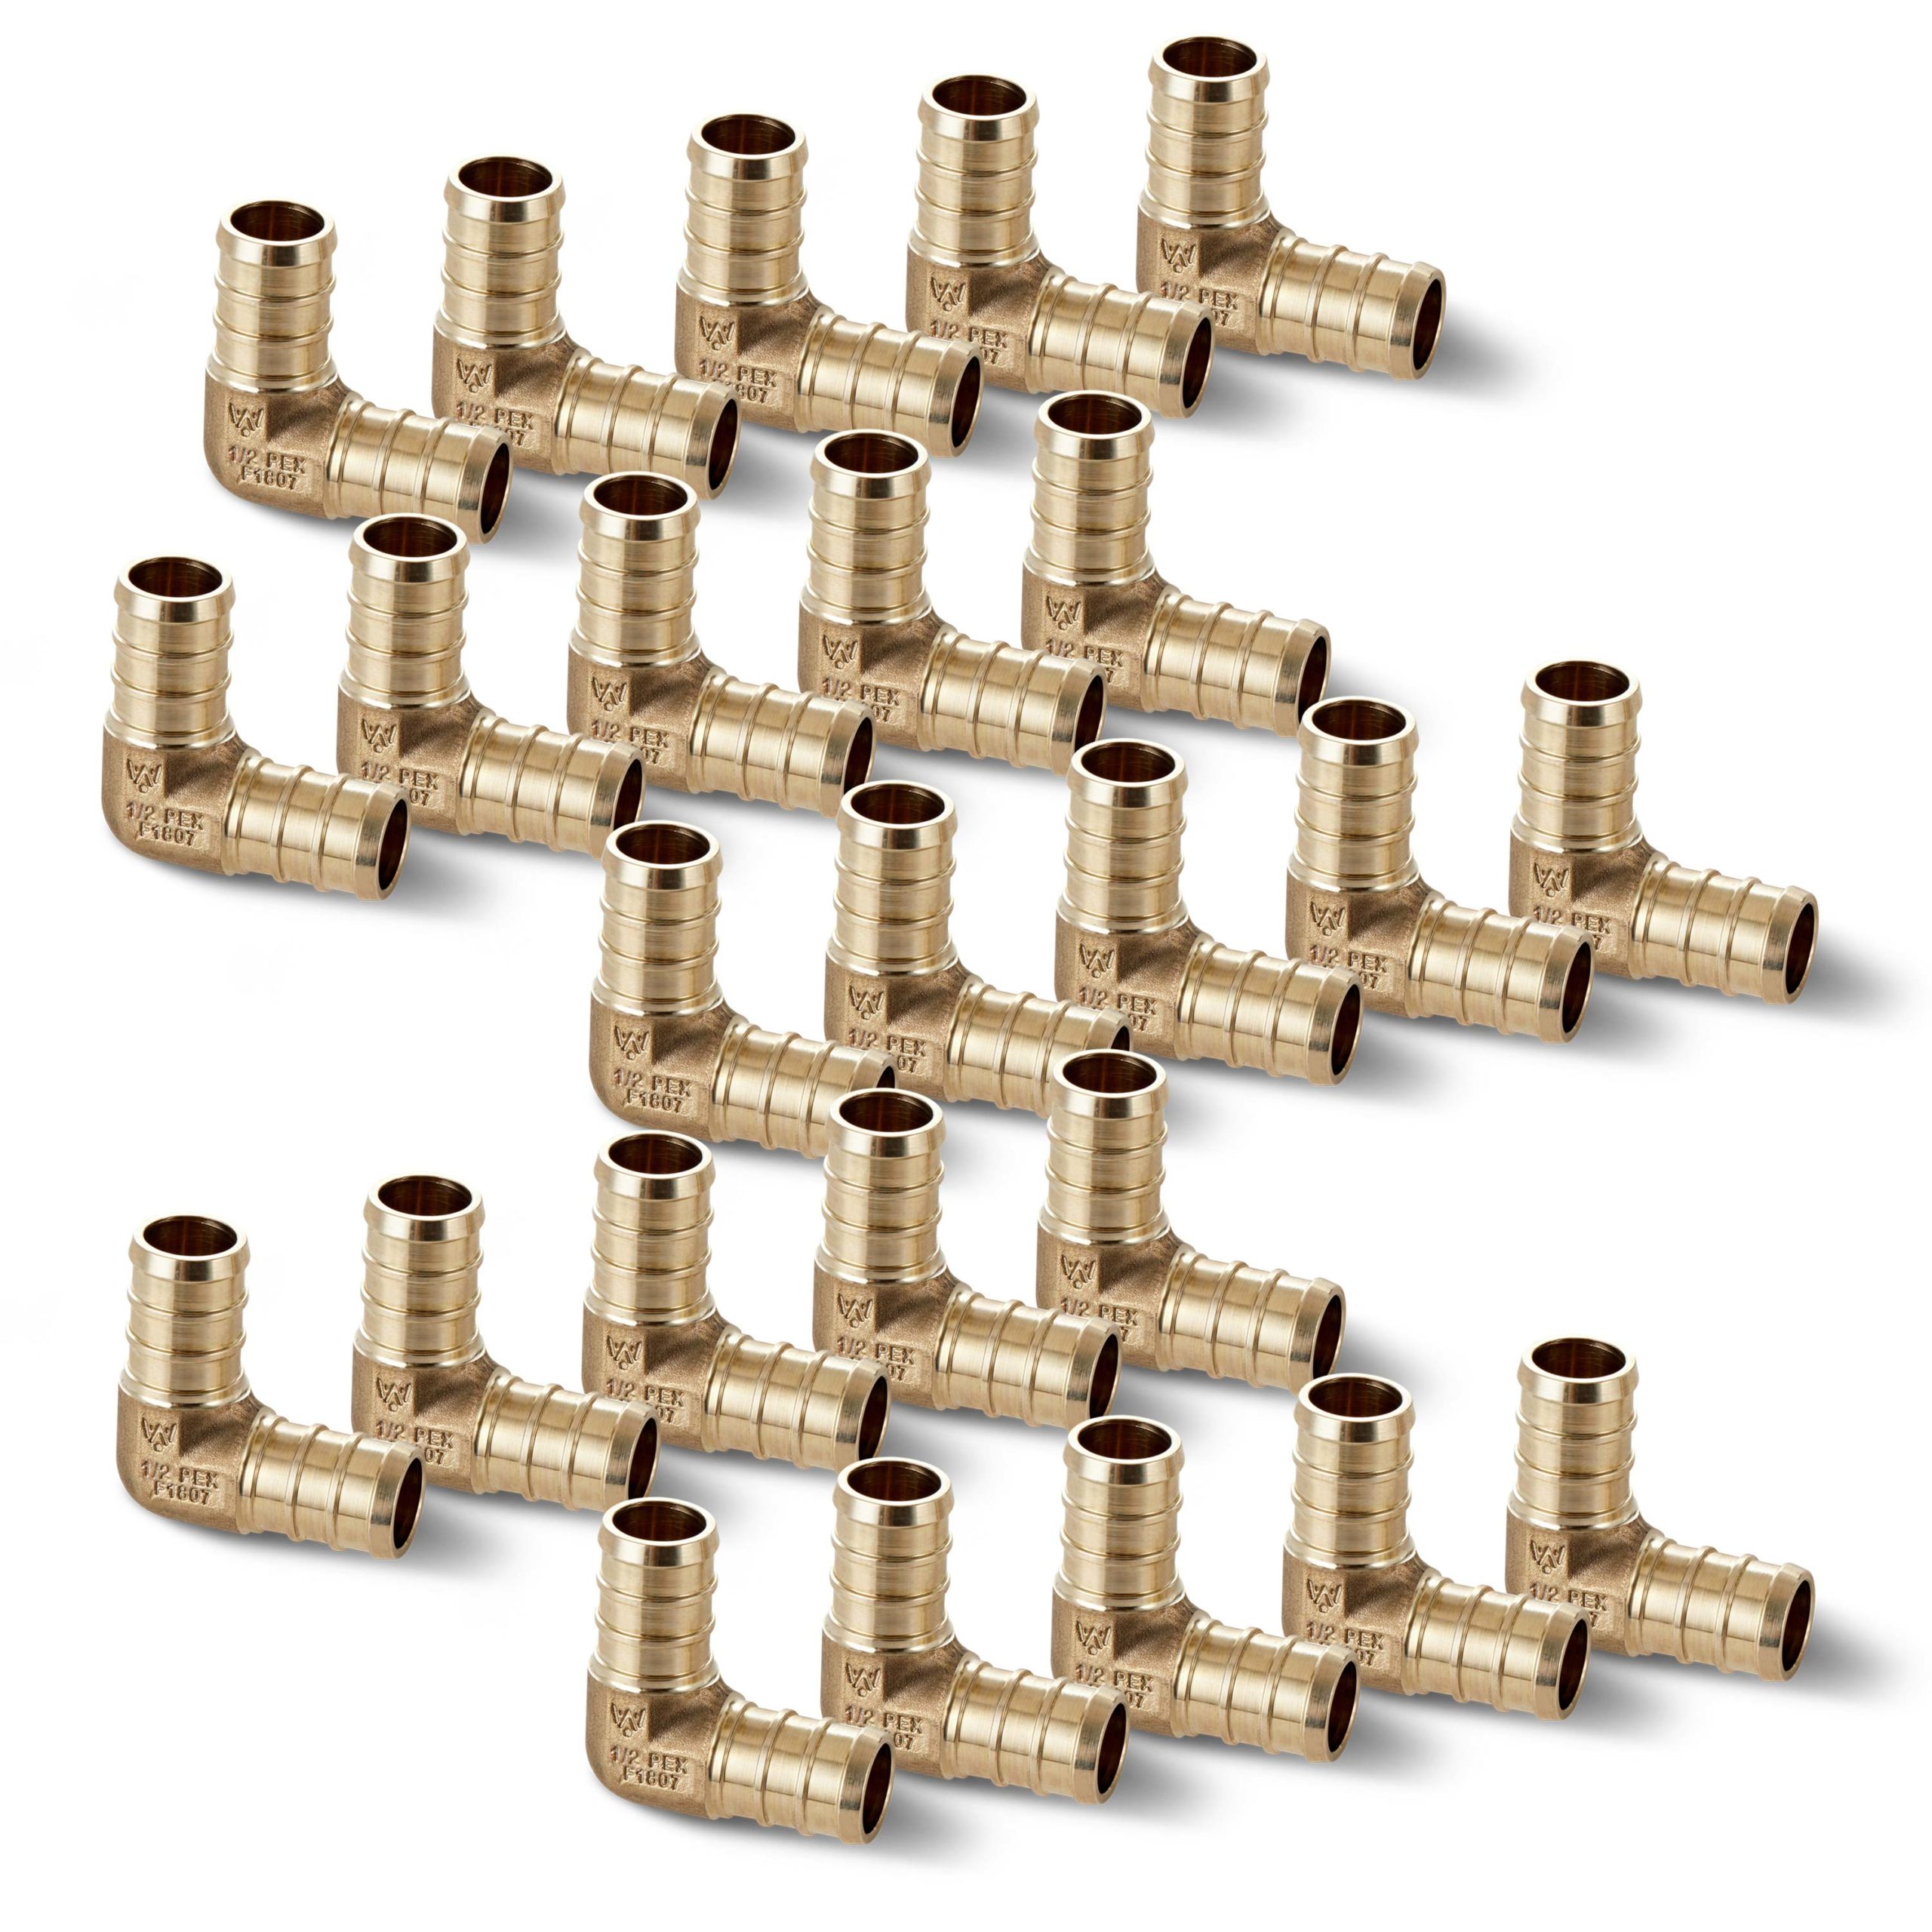 10 New 1/2" PEX 90 DEGREE BRASS LEAD FREE ELBOWS Fitting Water Line Connector 